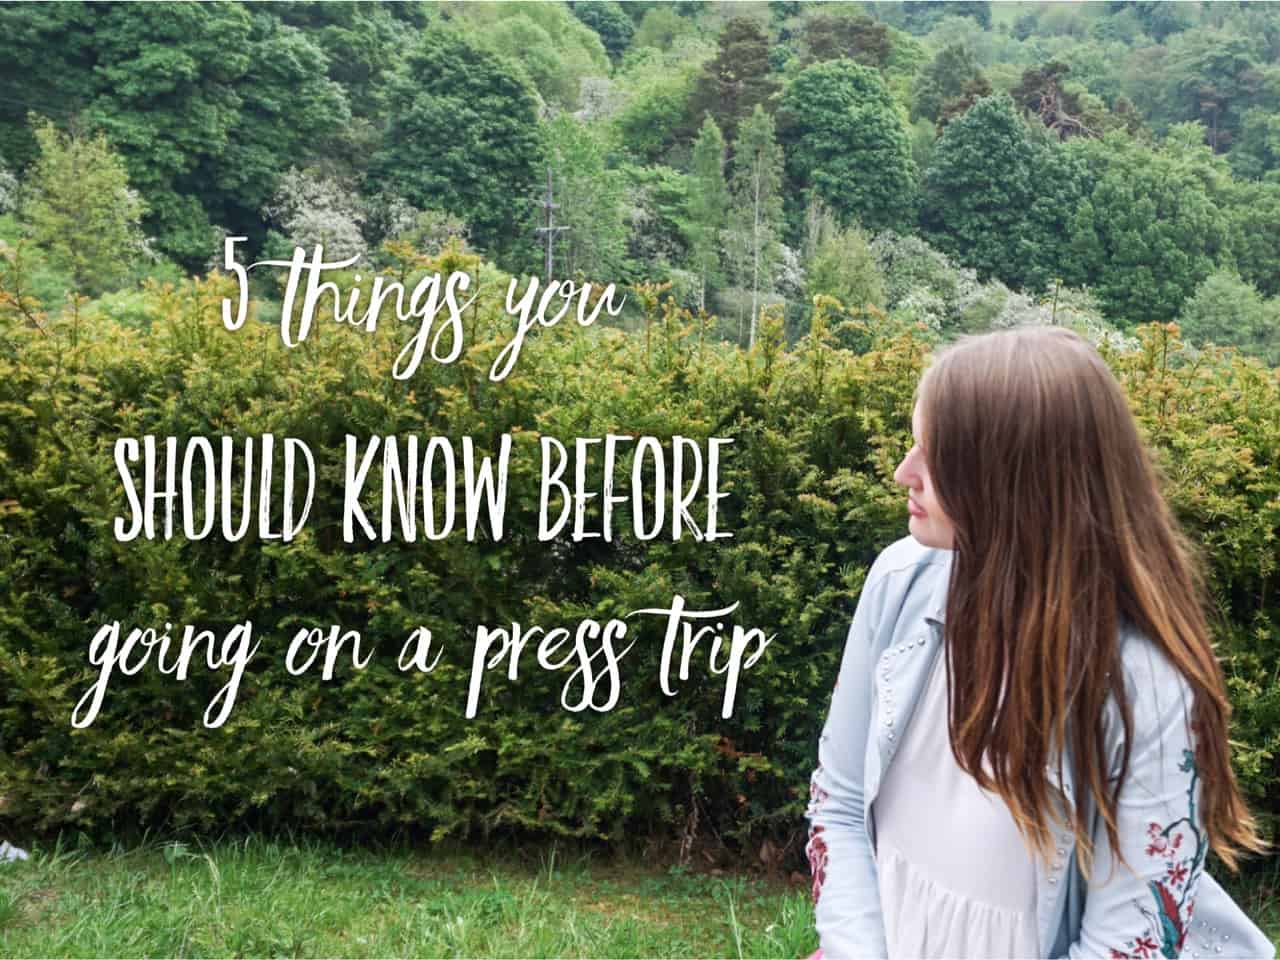 5 things you should know before going on a press trip to avoid disappointment